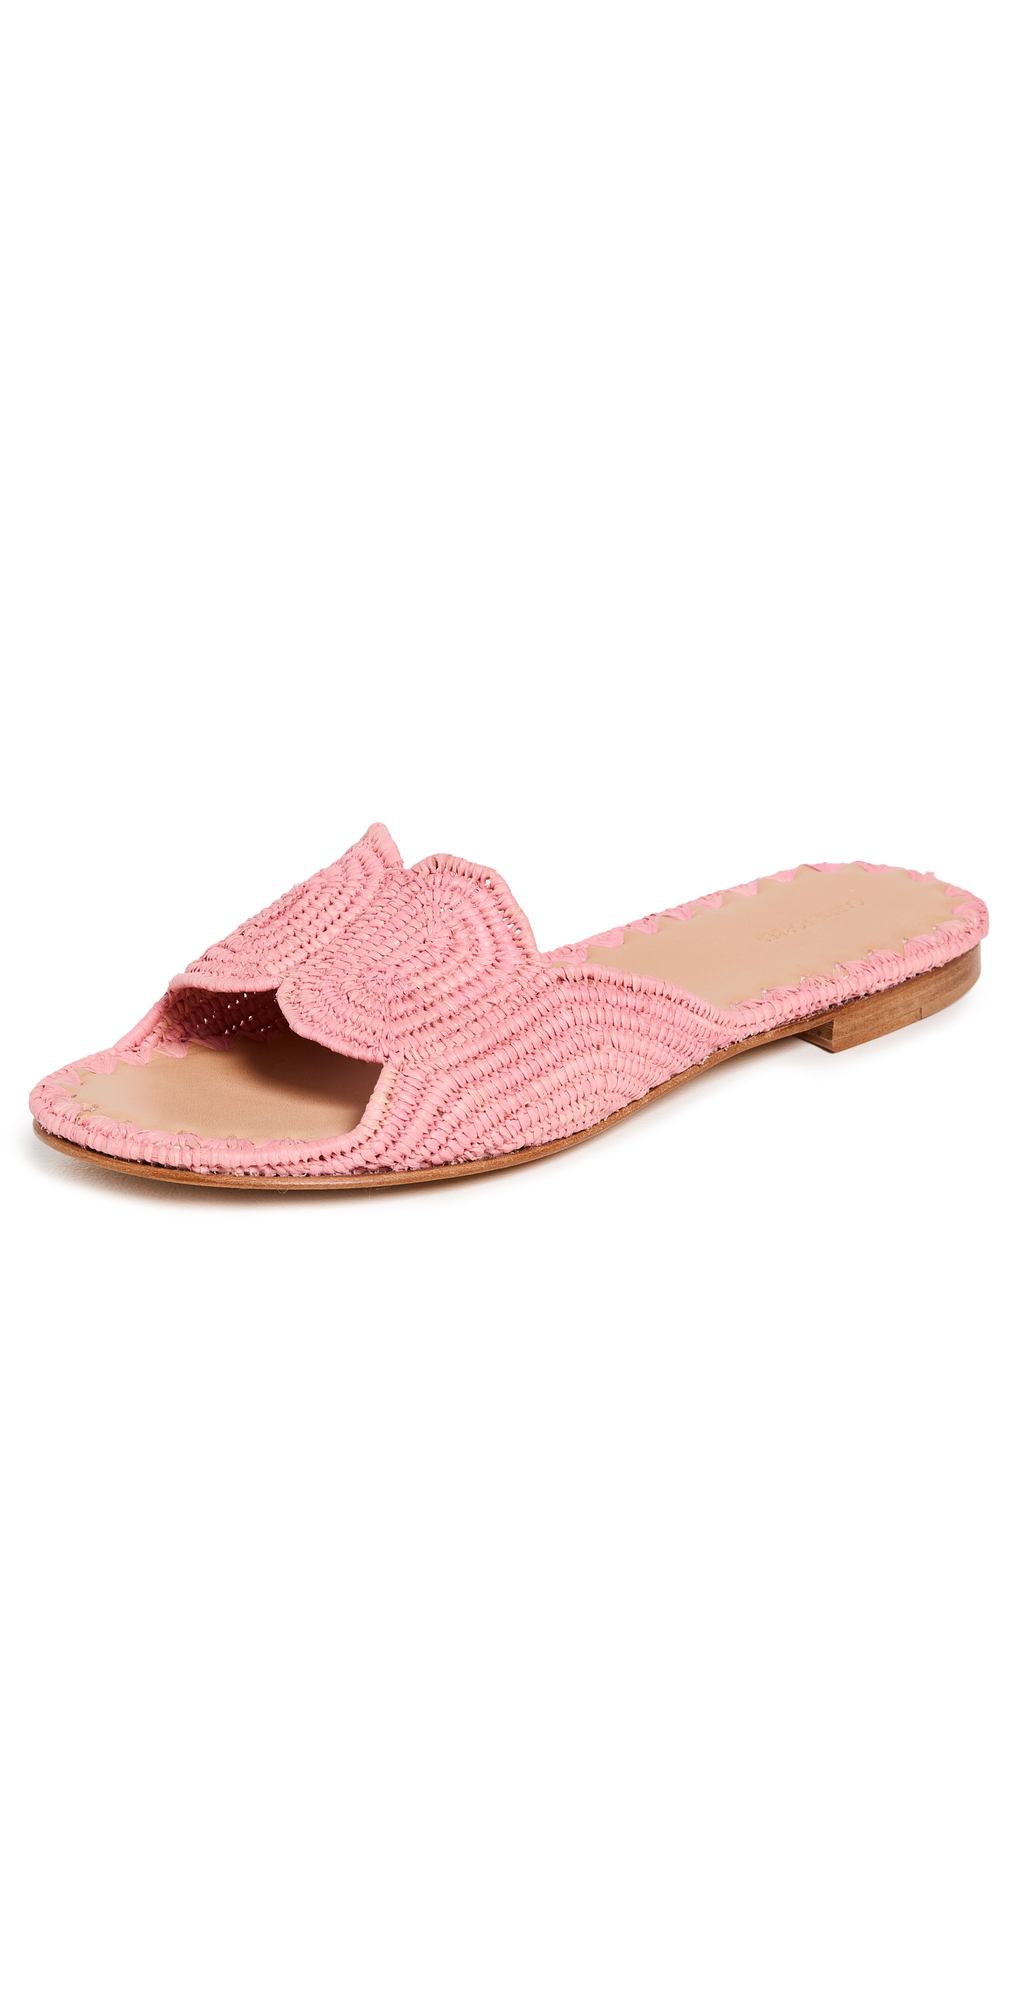 Buy Carrie Forbes Naima Slides Shoes Online | Shoes Trove